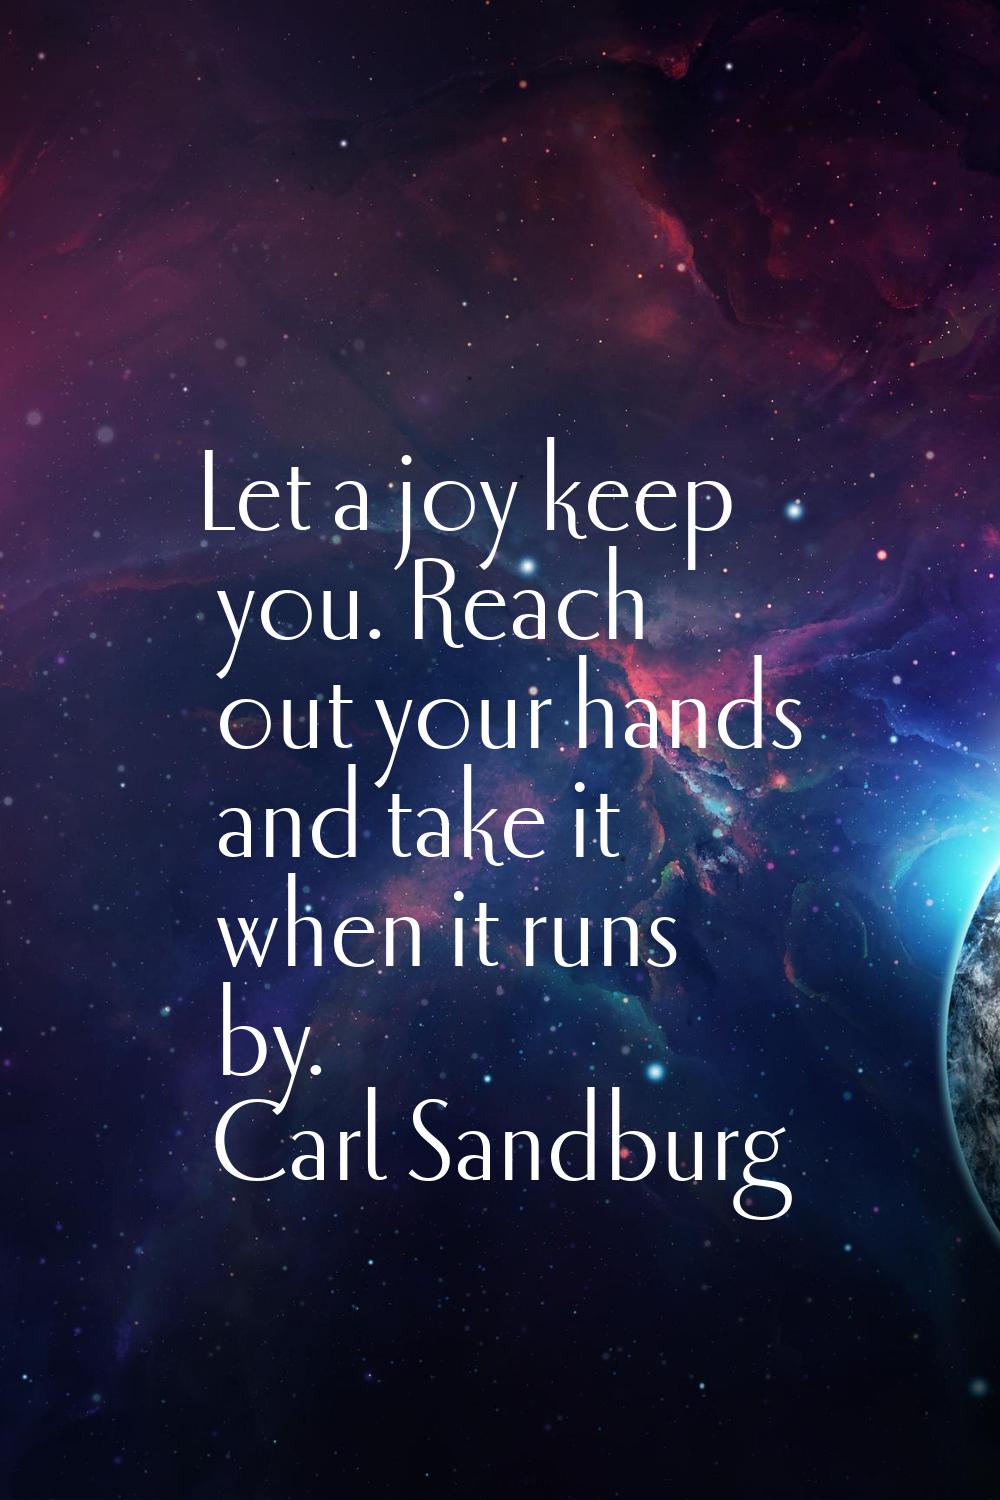 Let a joy keep you. Reach out your hands and take it when it runs by.